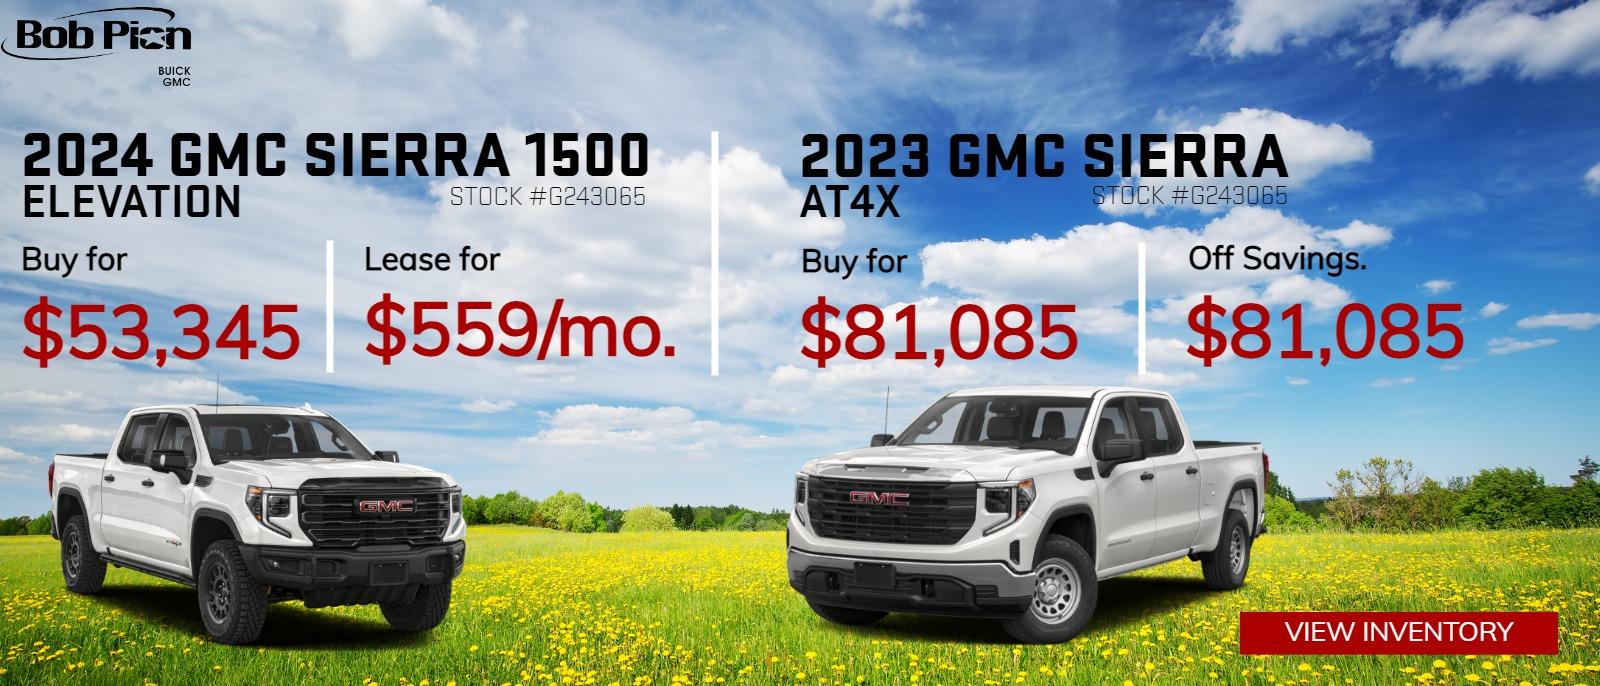 Lease for $559/mo Save $2257 OFF MSRP ($3559 D.A.S, Not all will qualify, Must have A+ Tier Credit, Lease Loyalty Rebate, $0 Acquisition Fee)
Buy for: $53,345 $4,000 OFF MSRP!

 G233066 2023 GMC Sierra AT4X: Buy for $81,085! $10,000 OFF MSRP!